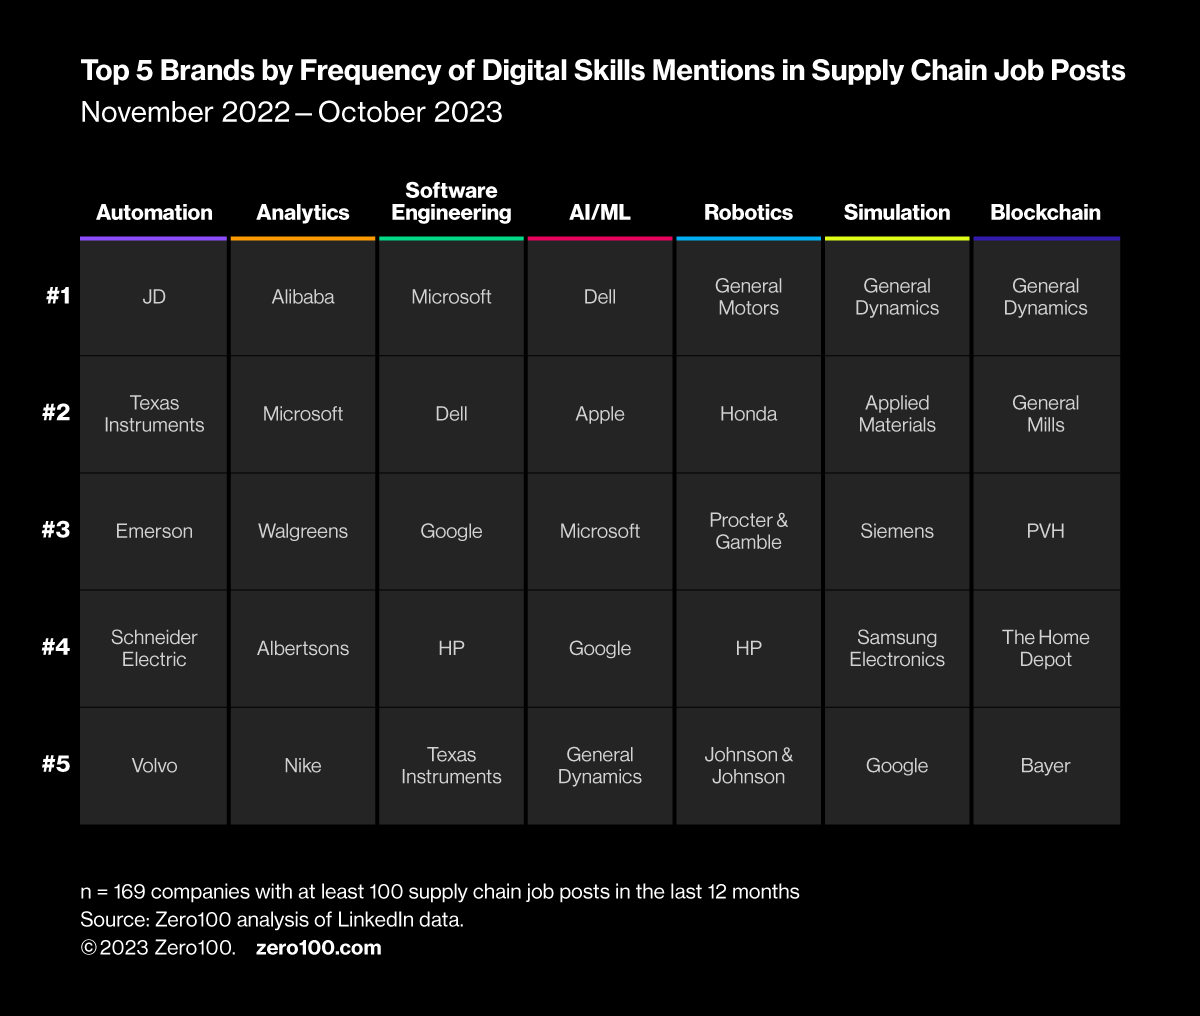 Table showing top five brands that mention specific digital skills most frequently in supply chain job posts.